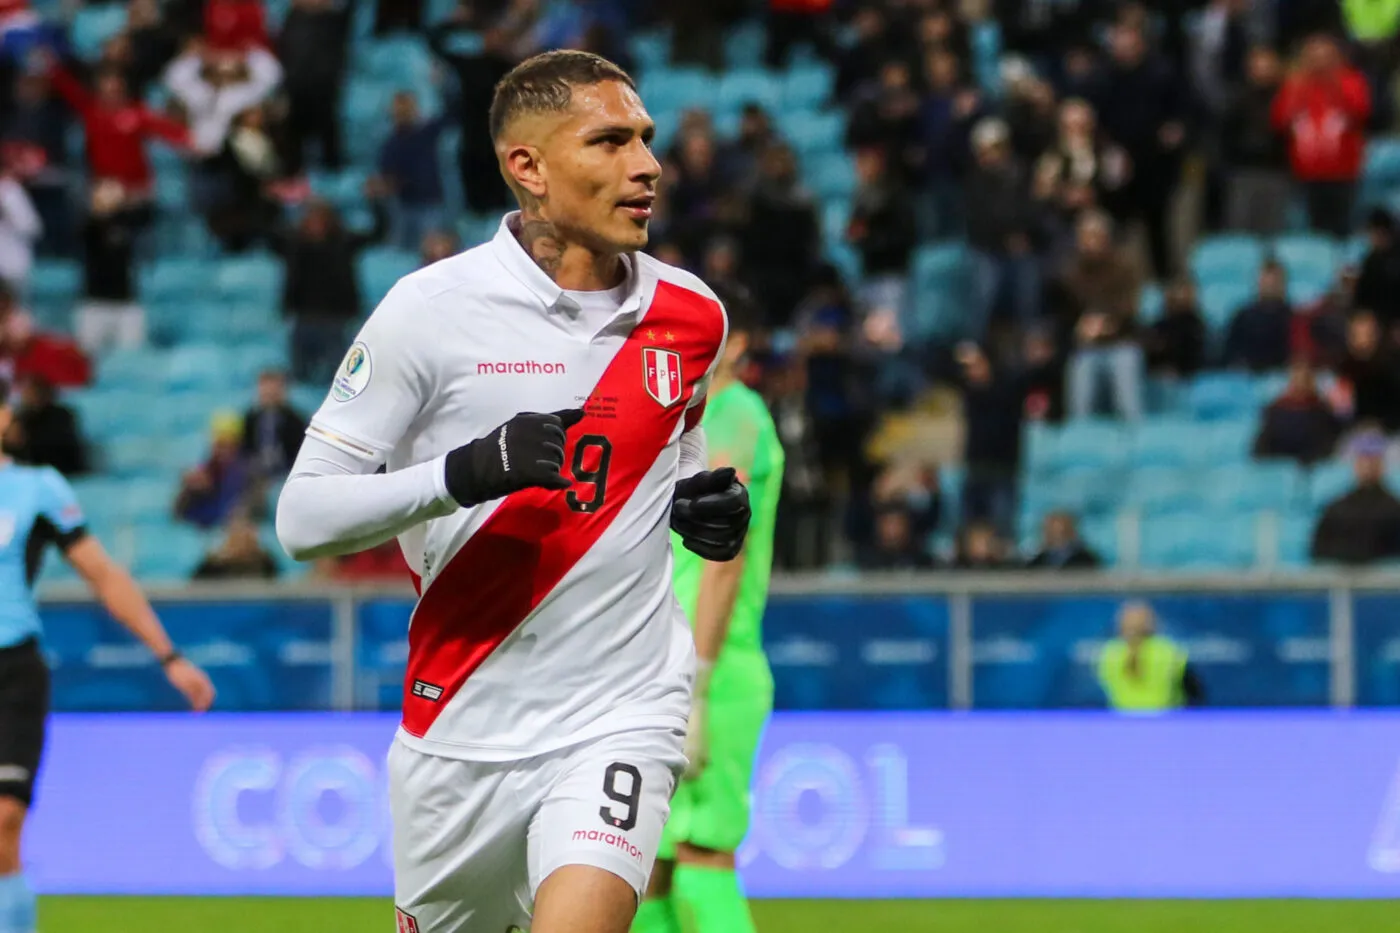 Paolo Guerrero of Peru celebrates his goal for 0-3 in the 90th minute of the game during the Copa America match between Chile and Peru, in Arena Grimio, Porto Alegre, on July 3rd, 2019.
Photo : ActionPlus / Icon Sport